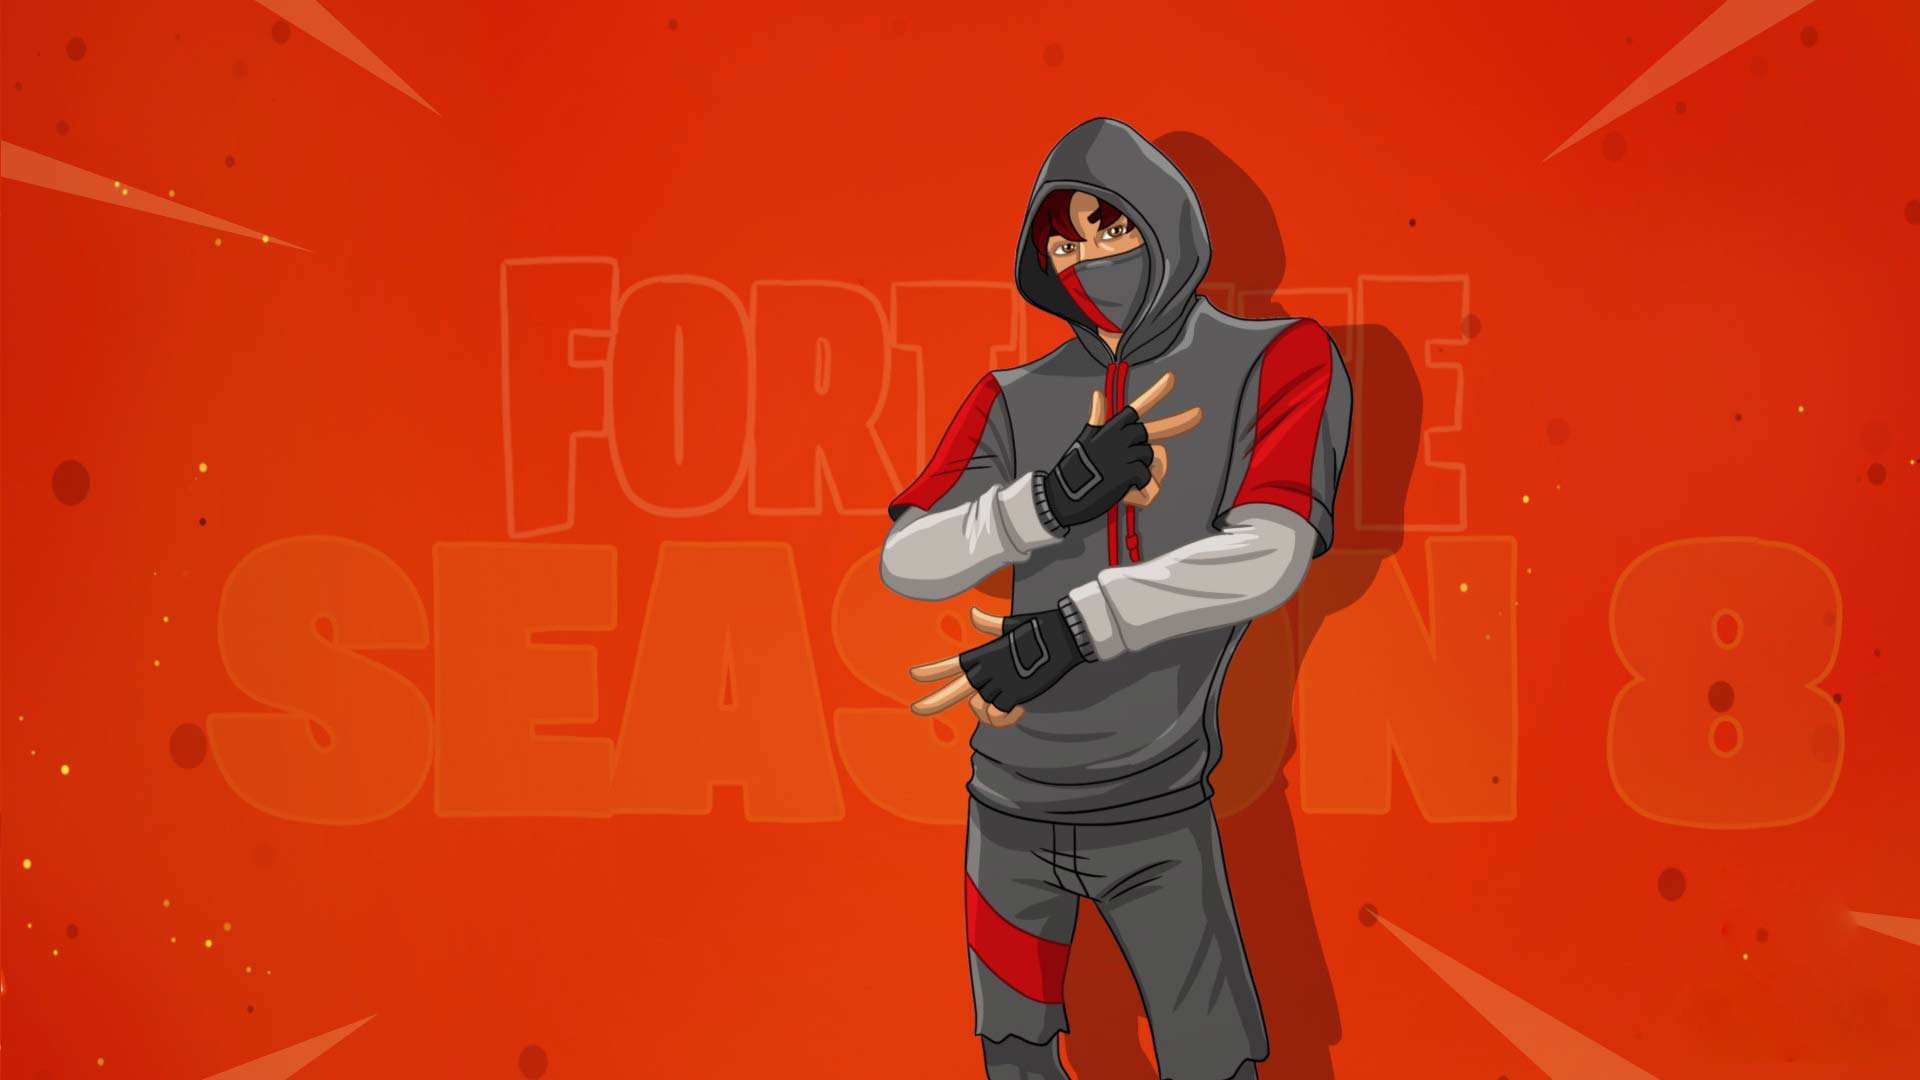 800x1280 Fortnite Ikonik Nexus 7 Samsung Galaxy Tab 10 Note Android Tablets Wallpaper Hd Games 4k Wallpapers Images Photos And Background